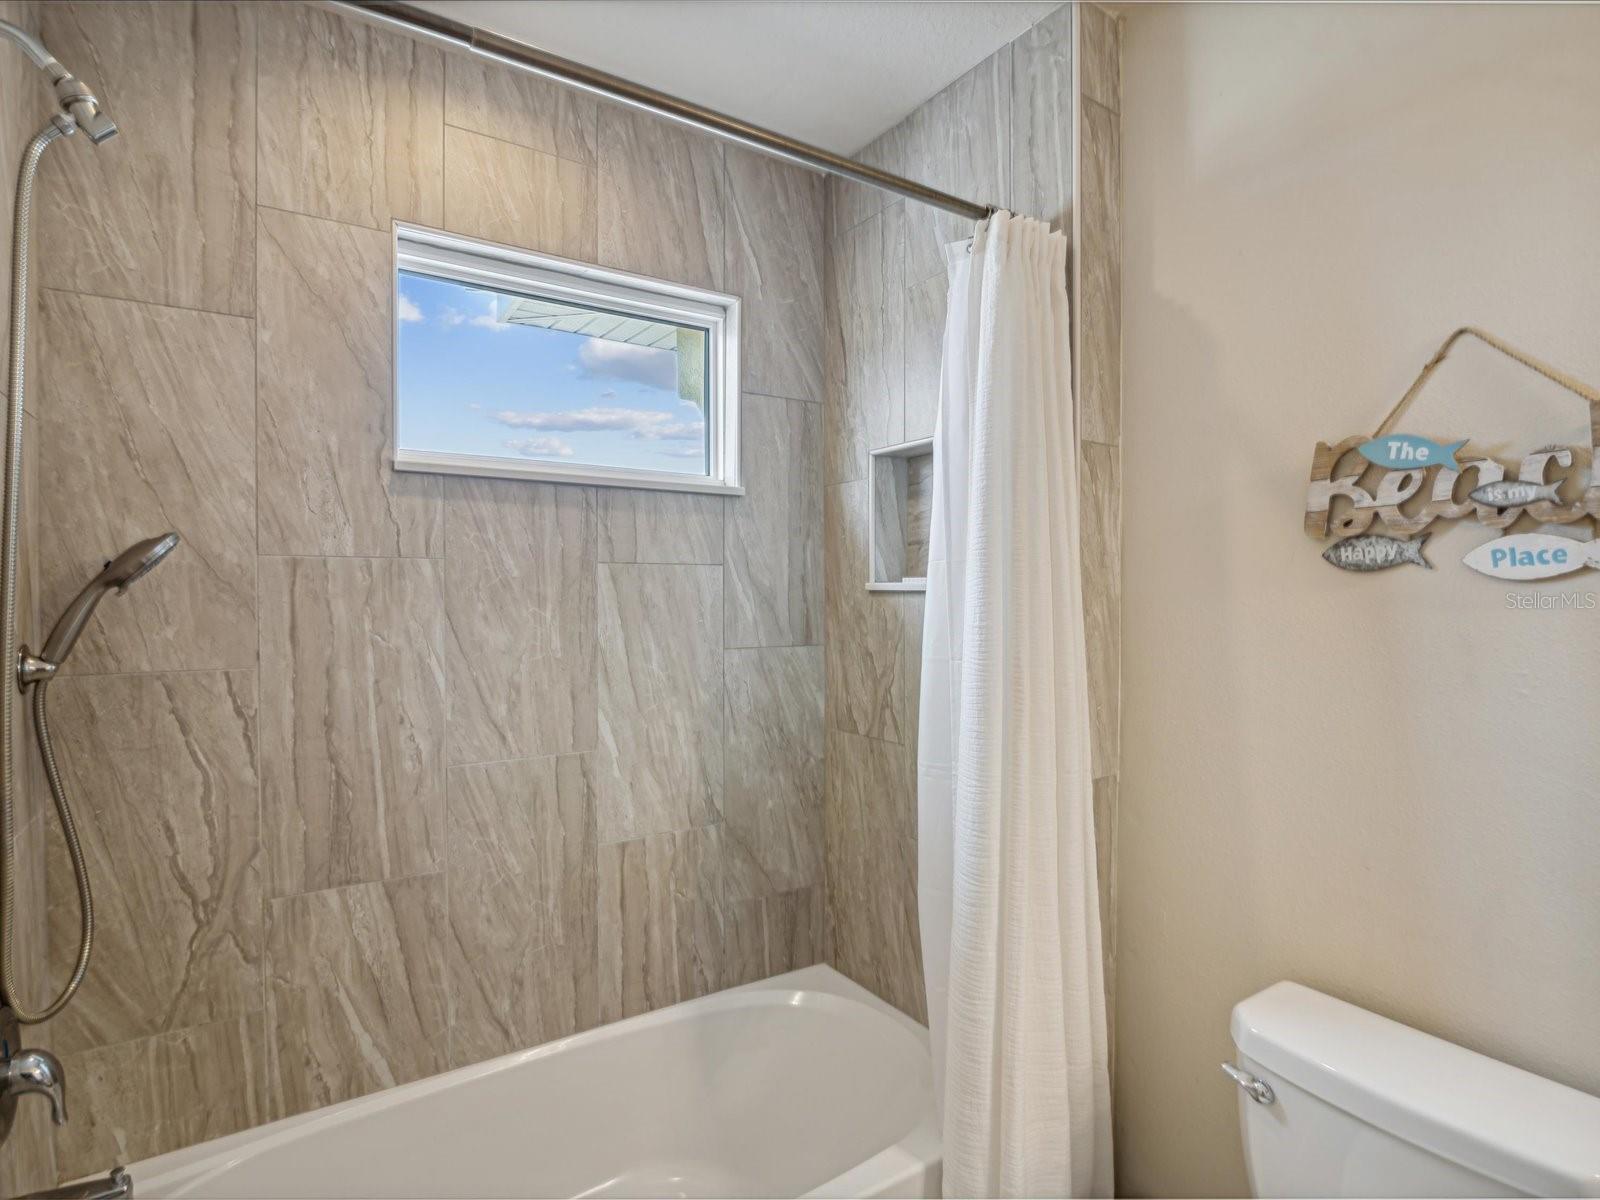 Shower/tub combo with niche